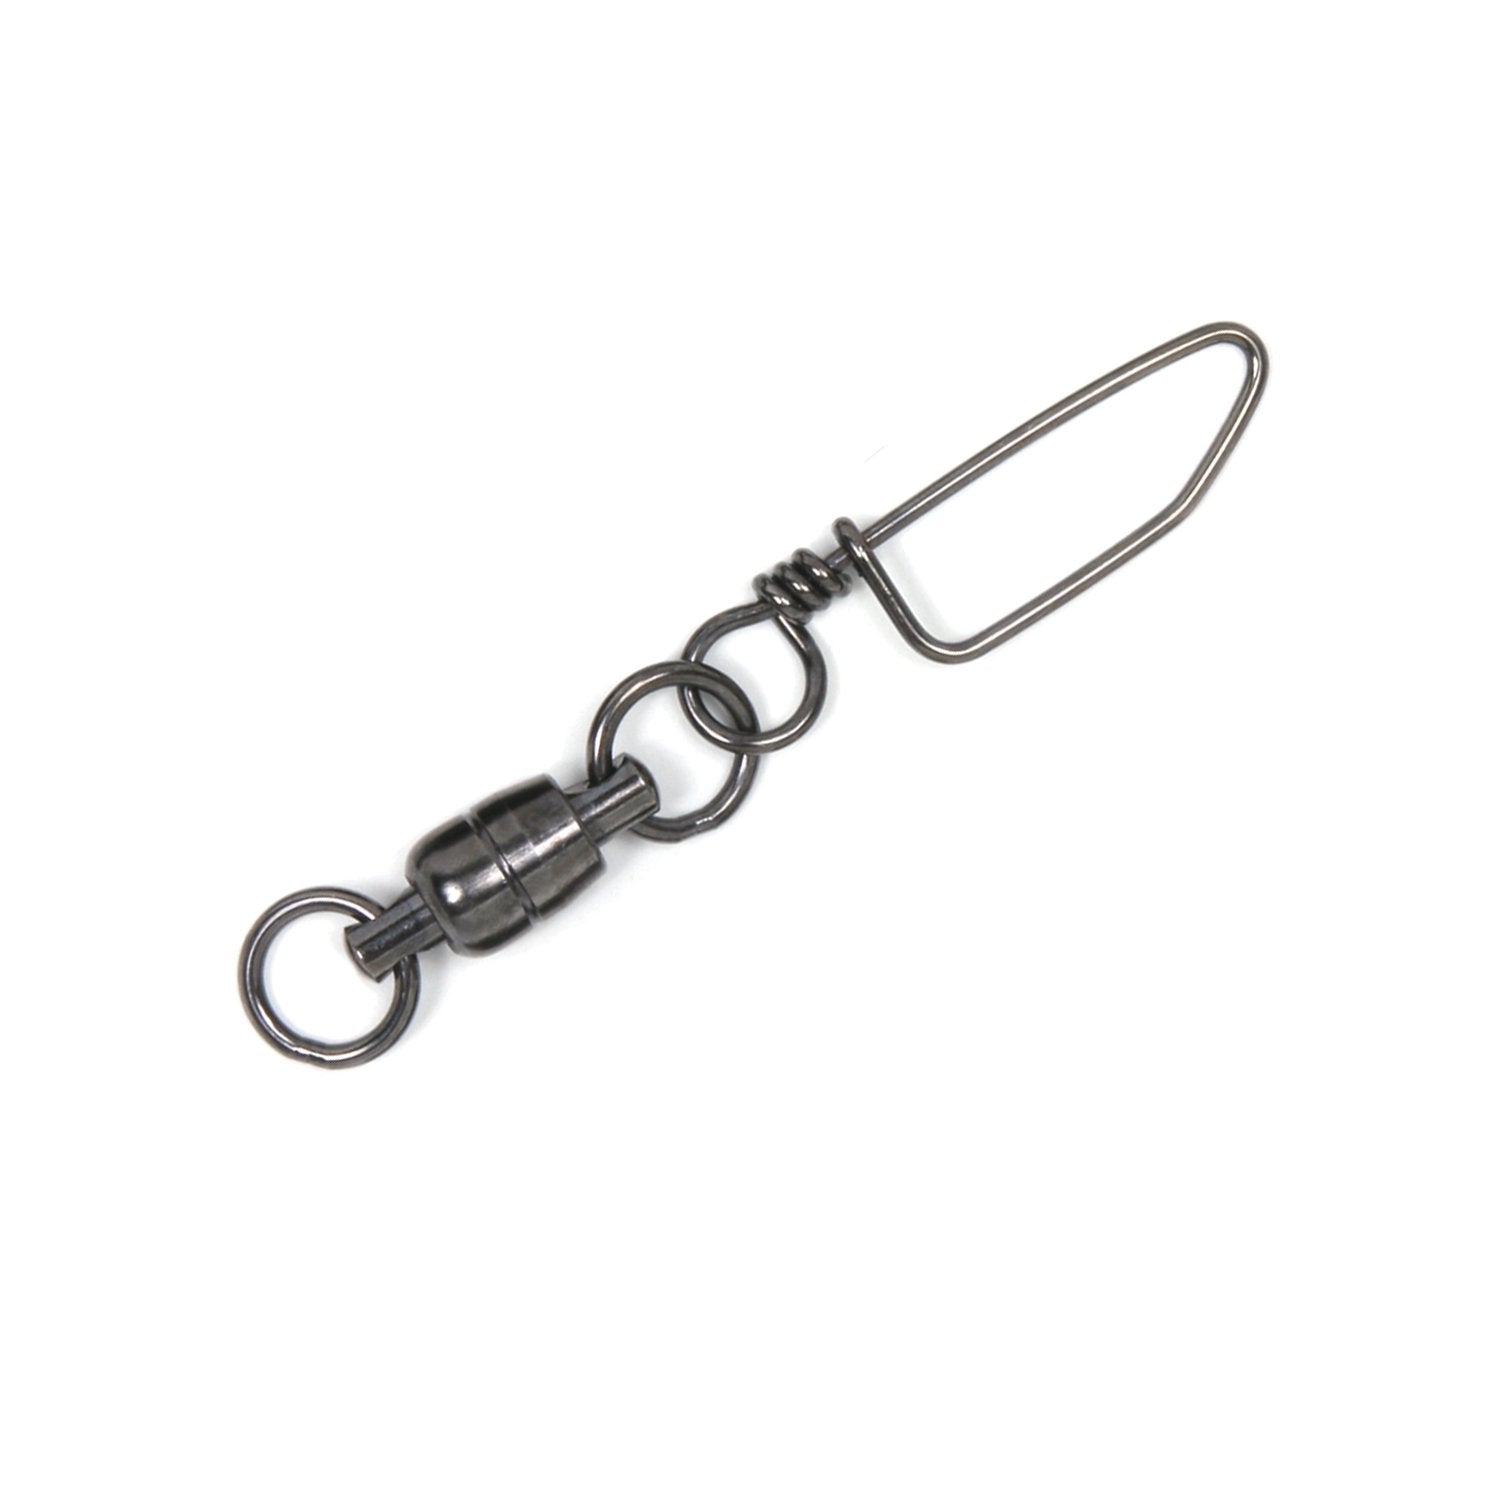 Stainless Steel Ball Bearing Snap Swivels, Size #1, 70 lb (32 kg